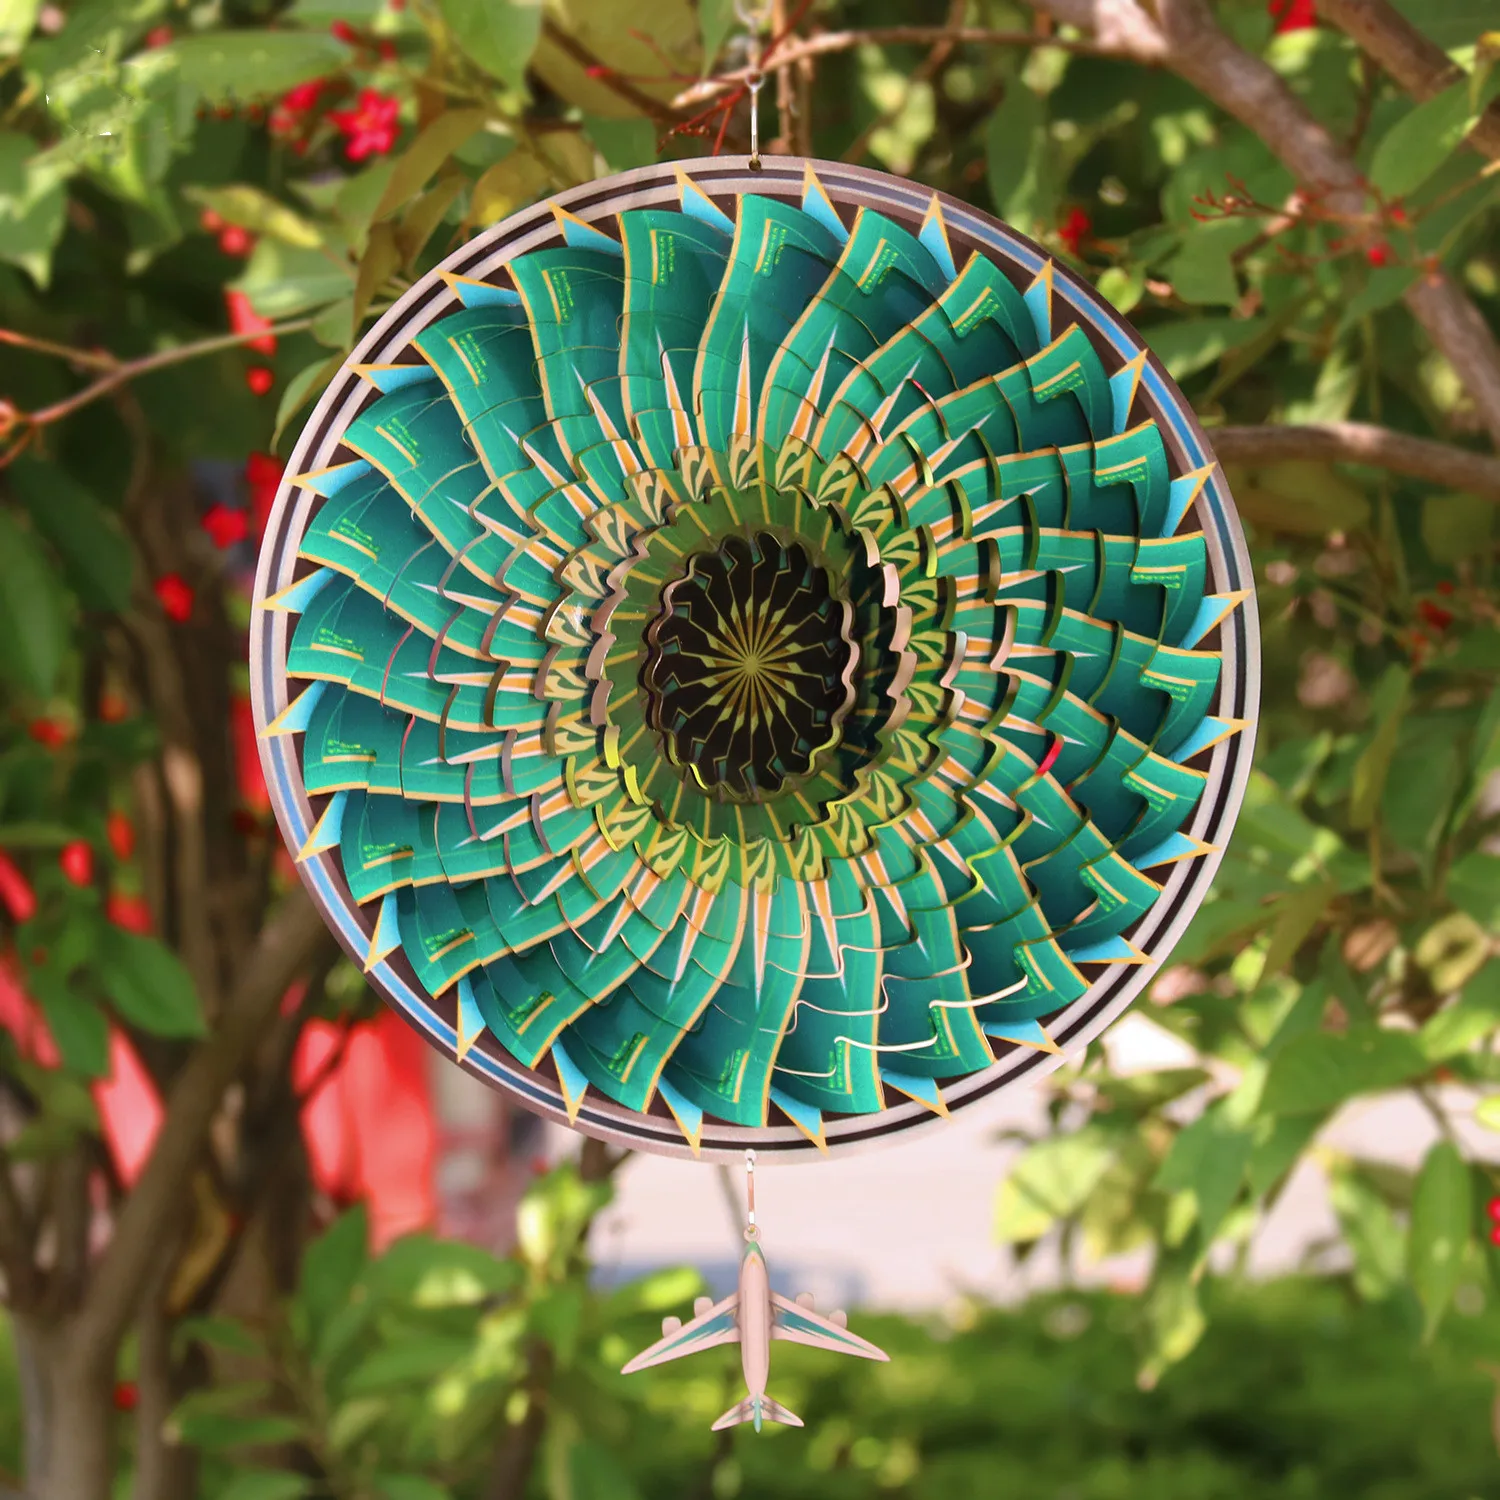 Wind Spinners-Hanging Wind Spinner Outdoor Metal,3D Kinetic Wind Sculptures Spinners Yard Art Decorations,Garden Spinner Hanging Ornaments for Home Balcony Porch Patio|Tree of Life Wind Spinners 10 